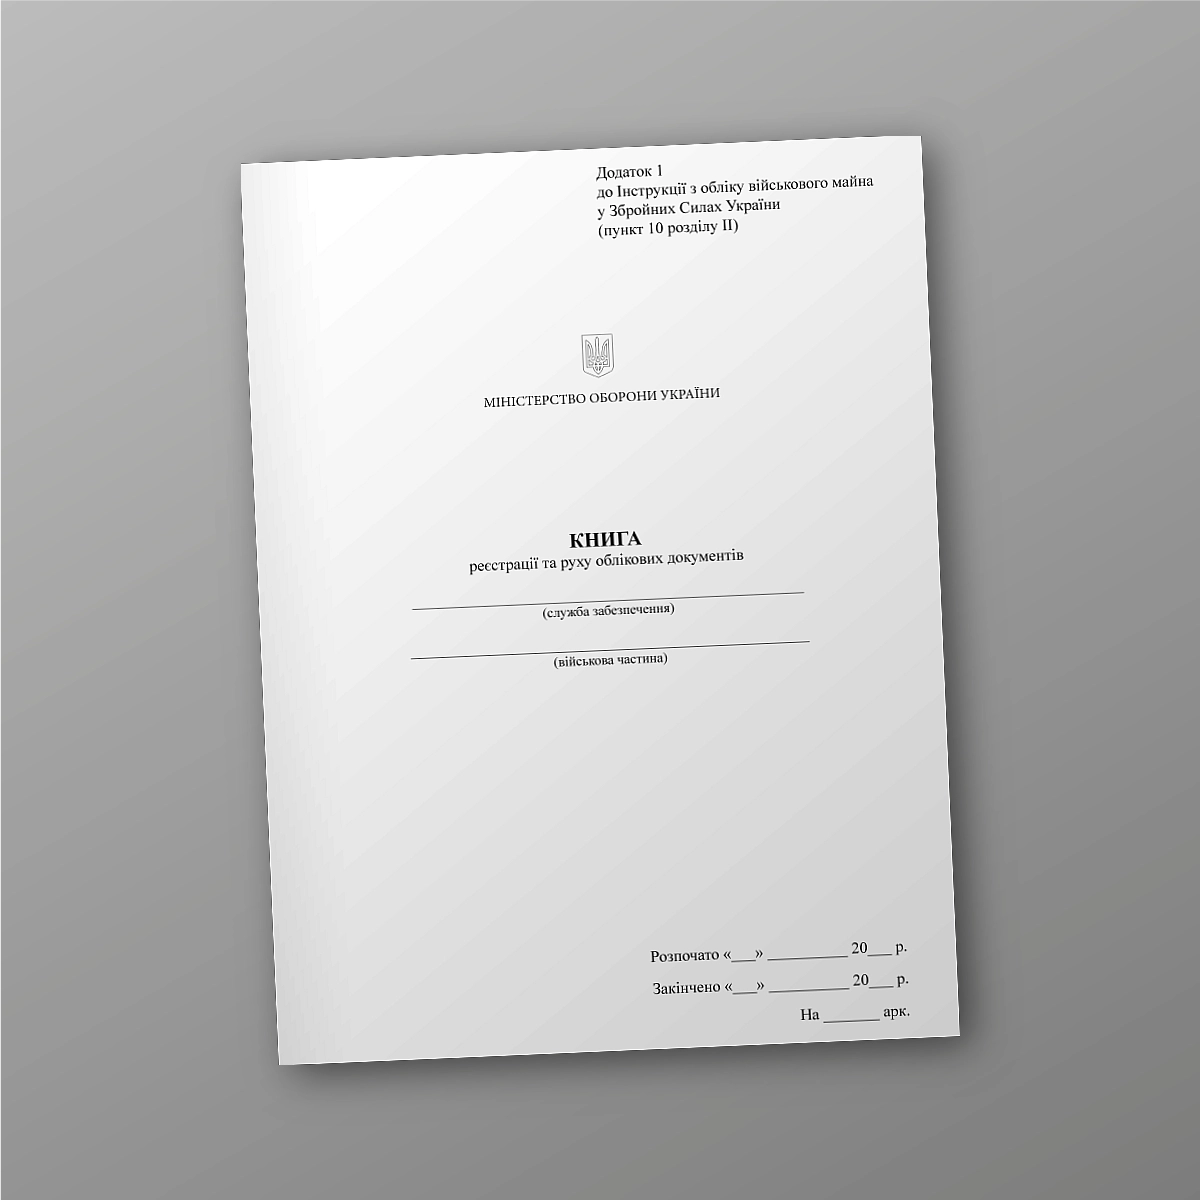 Book of registration and movement of accounting documents | PrintTo: